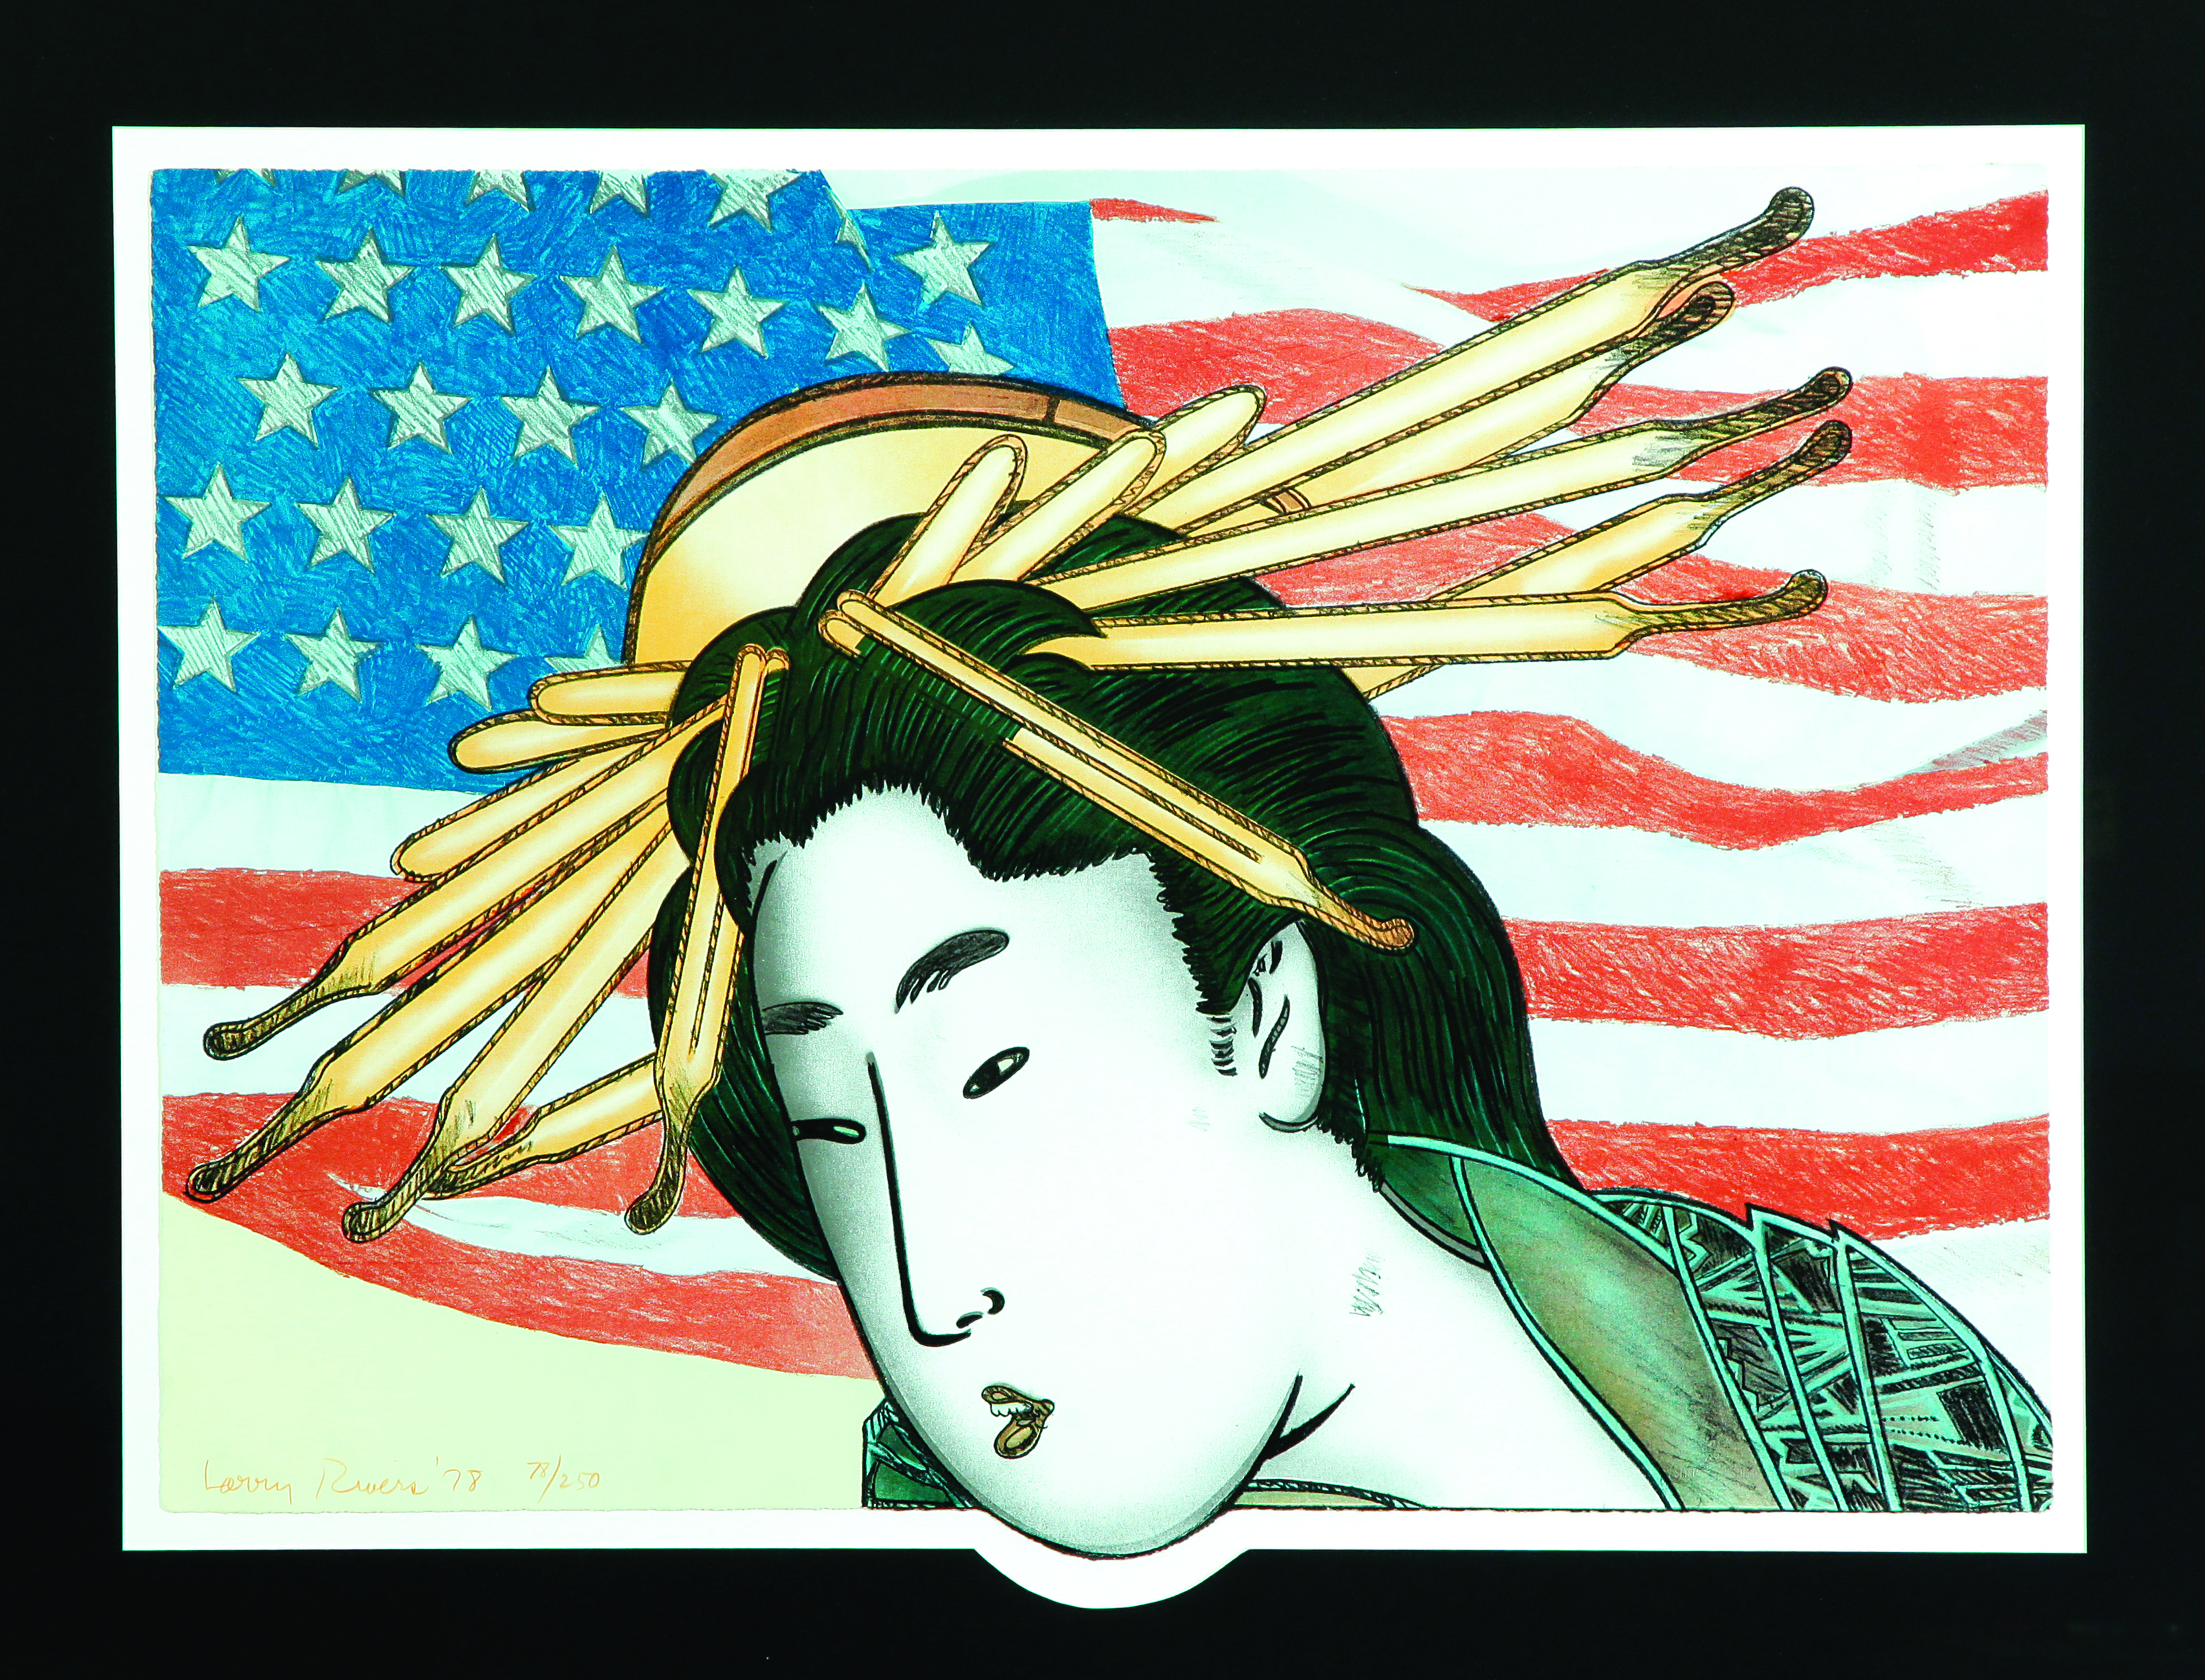 ‘Madama Butterfly,’ mixed media print by Larry Rivers, from a collection of original graphic works by eight contemporary artists, Metropolitan Opera Fine Art, estimate: $3,000­$5,000. Garth’s Auctioneers and Appraisers image